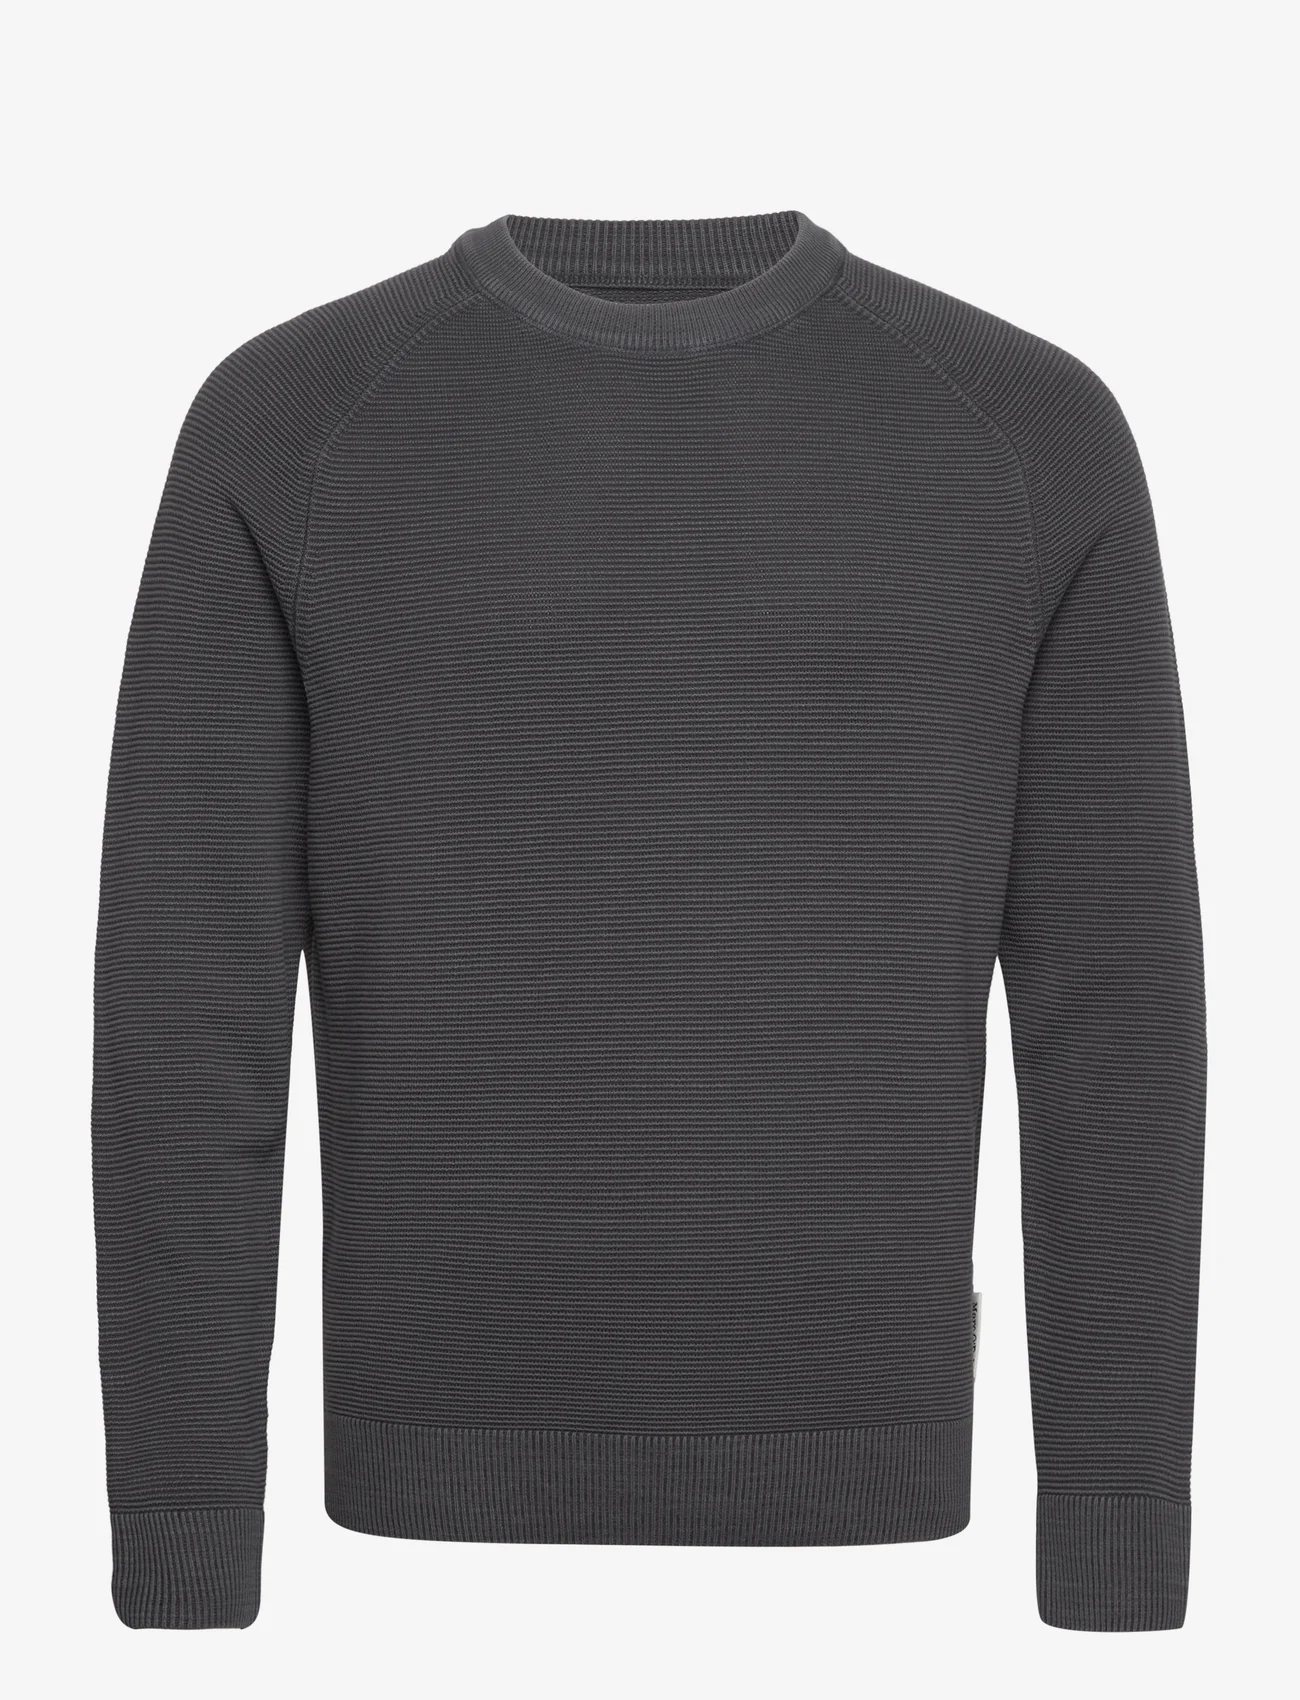 Marc O'Polo - PULLOVERS LONG SLEEVE - rund hals - gray pin - 0